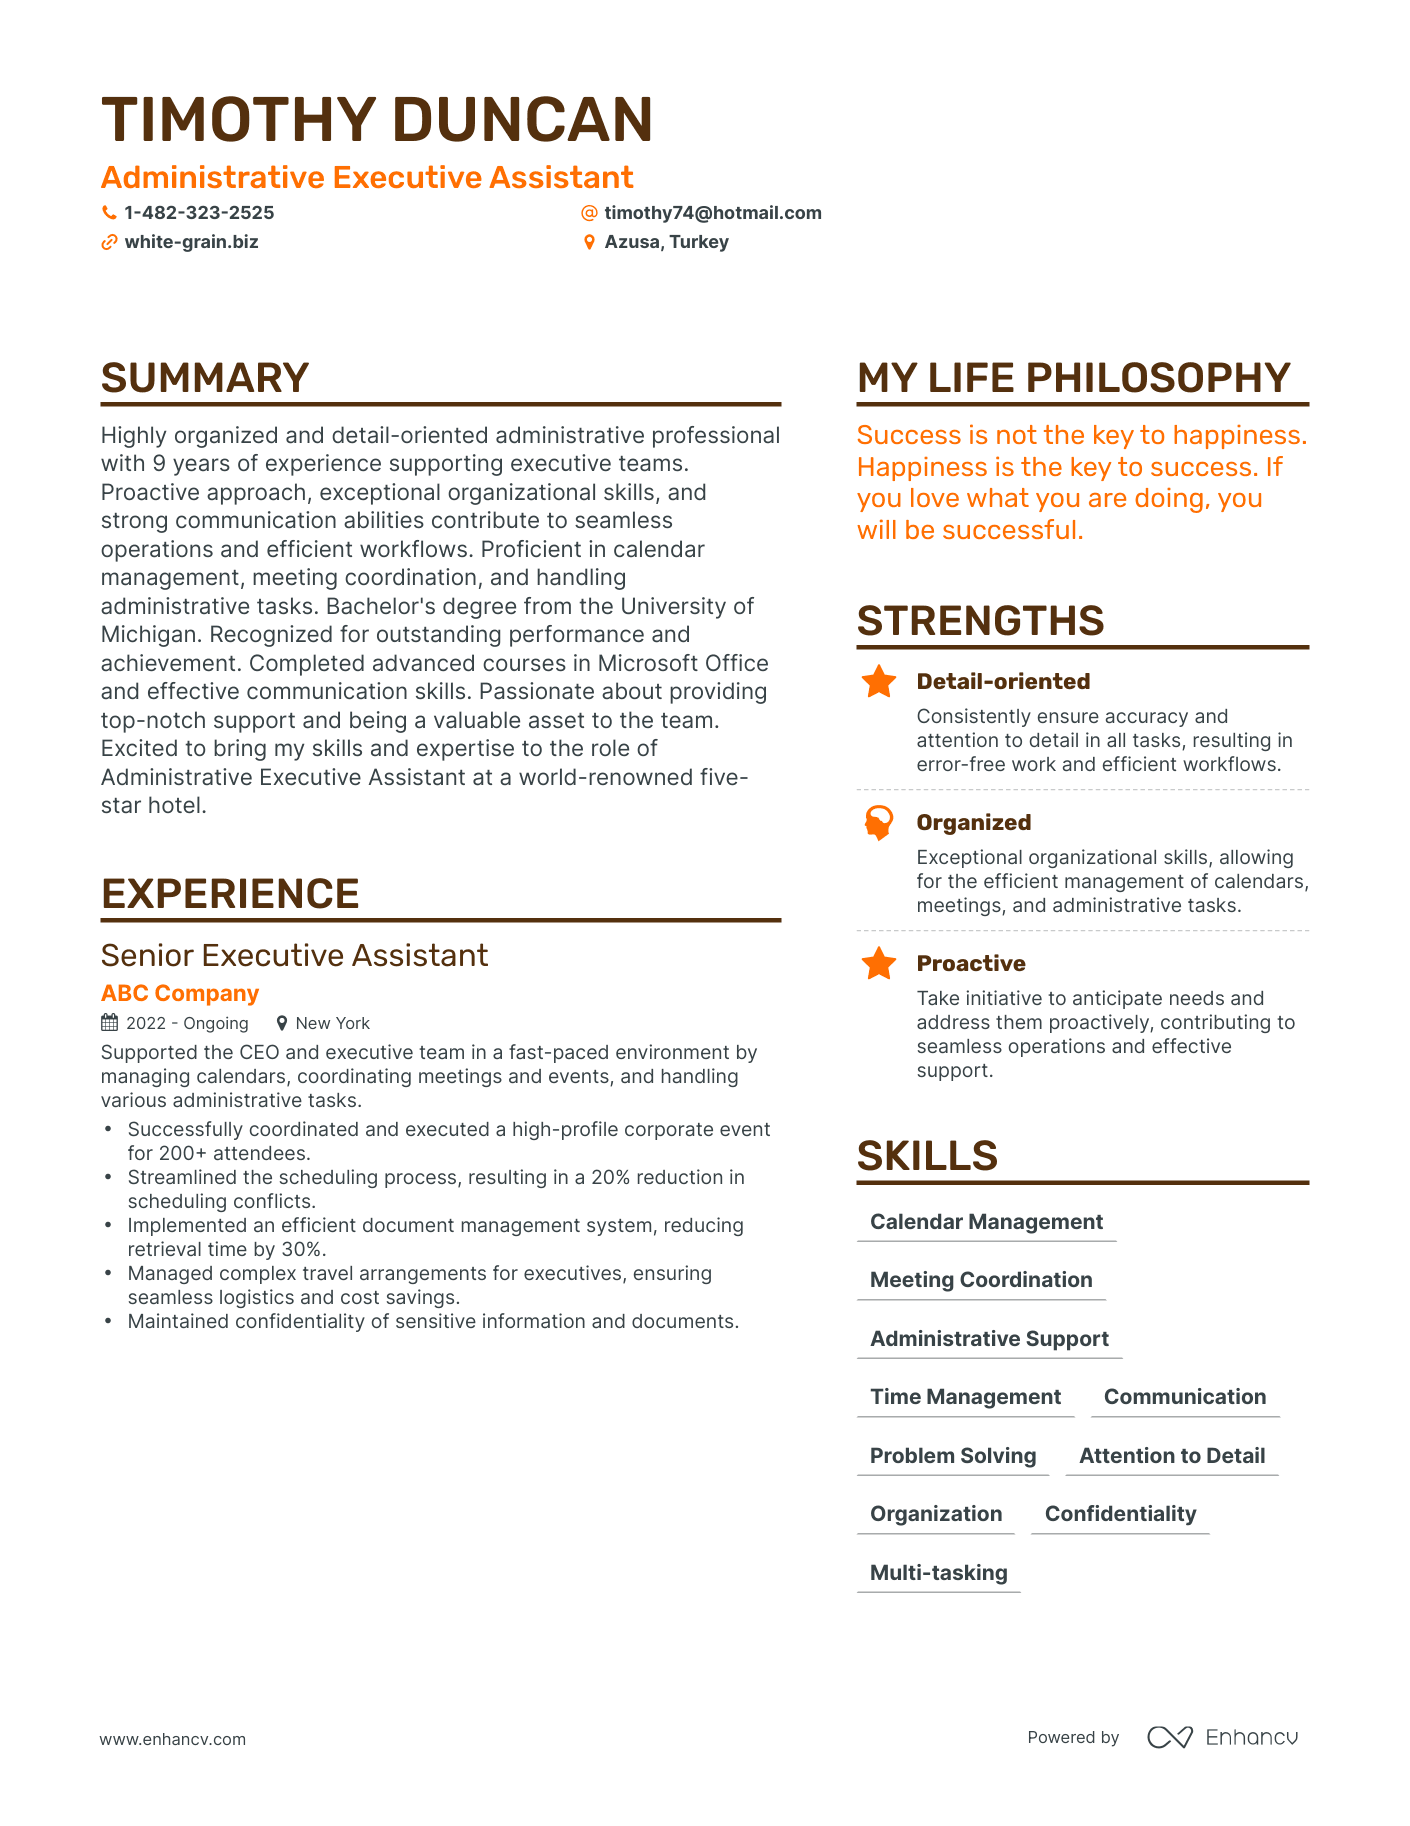 Administrative Executive Assistant resume example